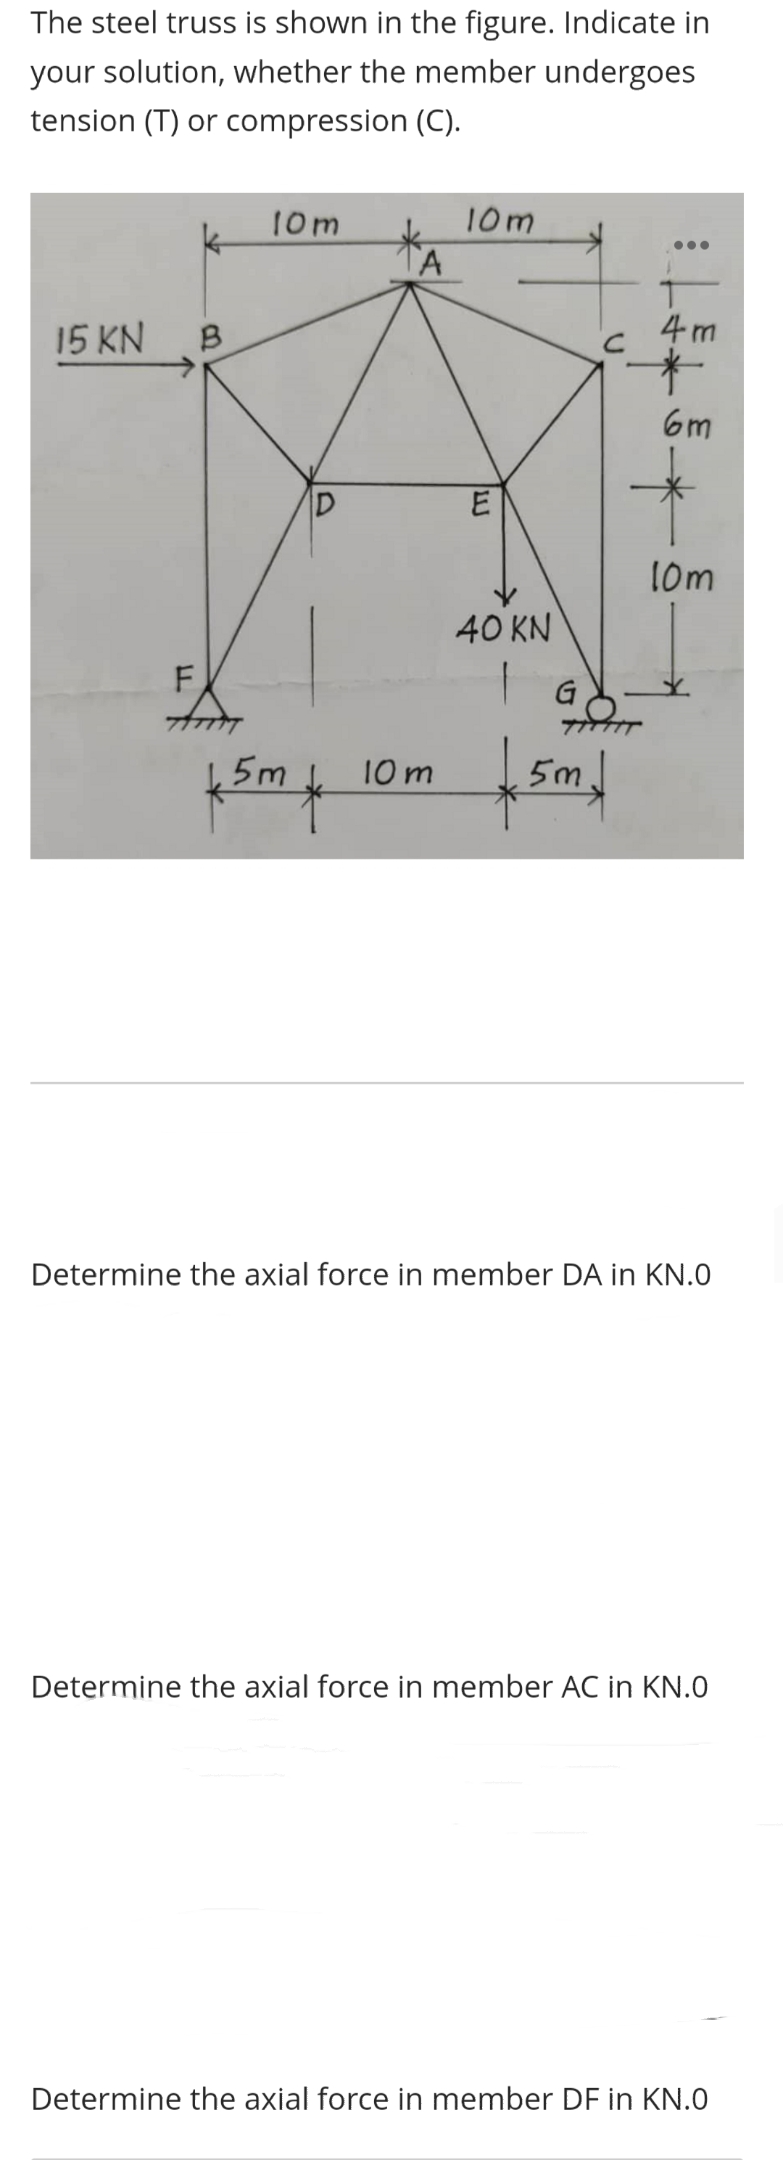 The steel truss is shown in the figure. Indicate in
your solution, whether the member undergoes
tension (T) or compression (C).
15 KN
B
F
10m
D
f5m4
A
10m
10m
ILI
E
40 KN
C
5m.
GO-
4m
6m
10m
Determine the axial force in member DA in KN.0
Determine the axial force in member AC in KN.0
Determine the axial force in member DF in KN.0